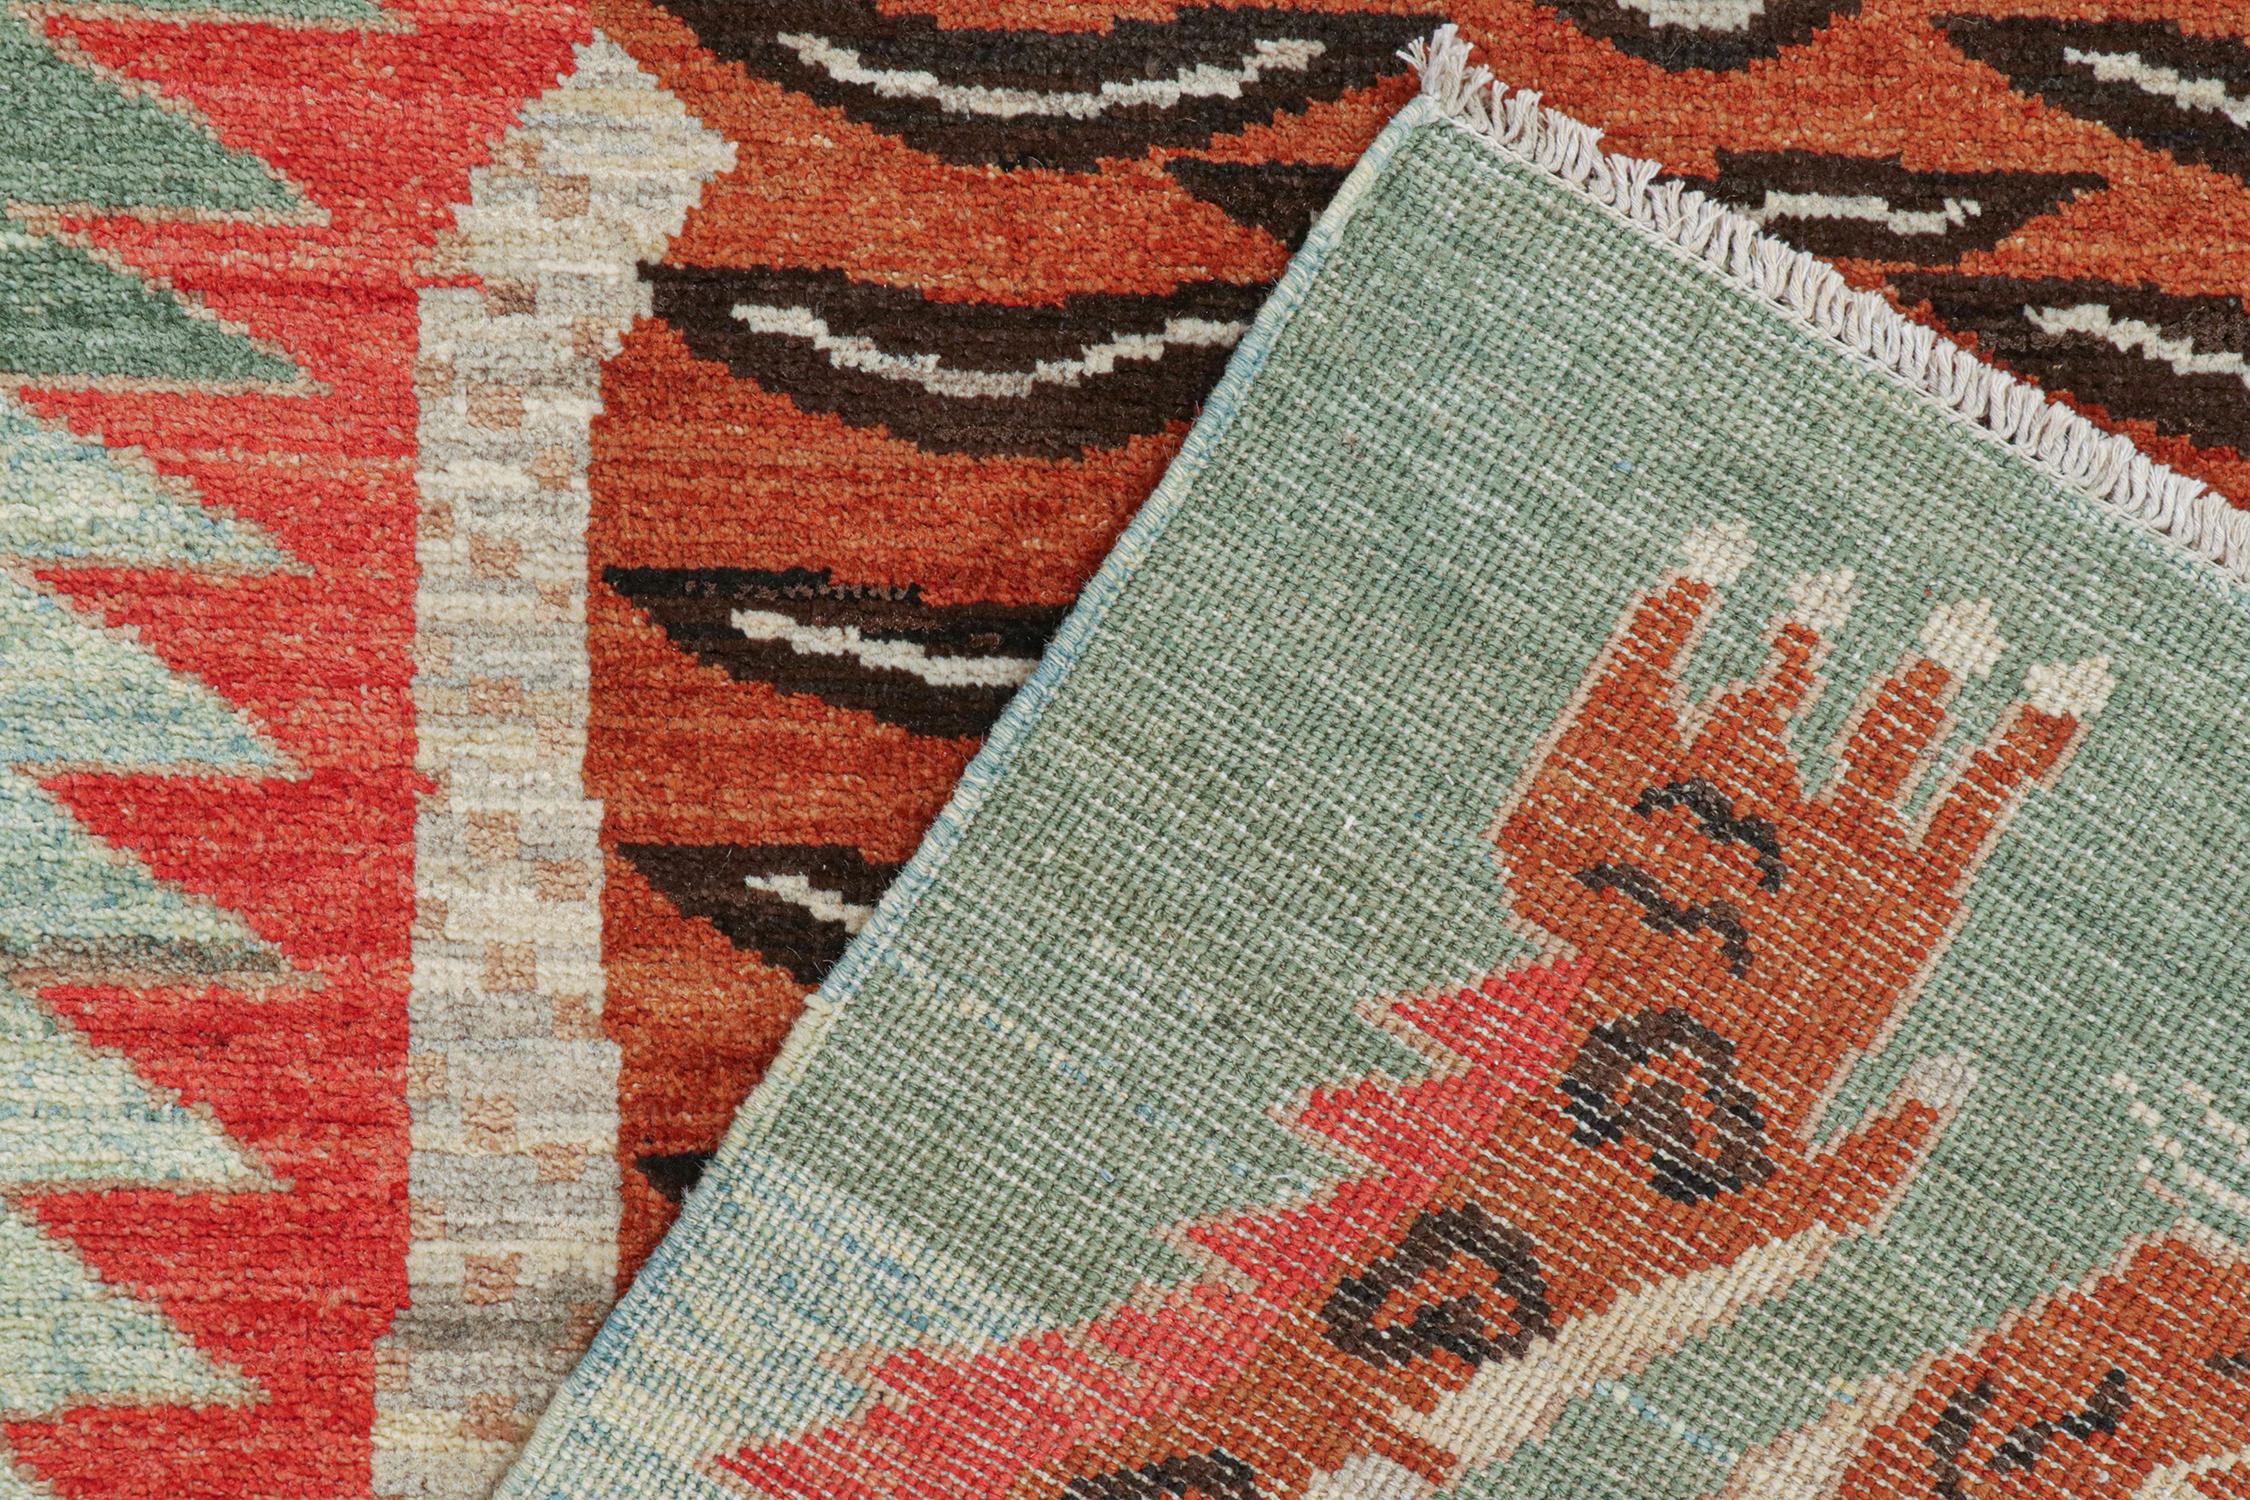 Wool Rug & Kilim’s Classic Style Tiger-Skin Runner with Orange and Brown Pictorial For Sale